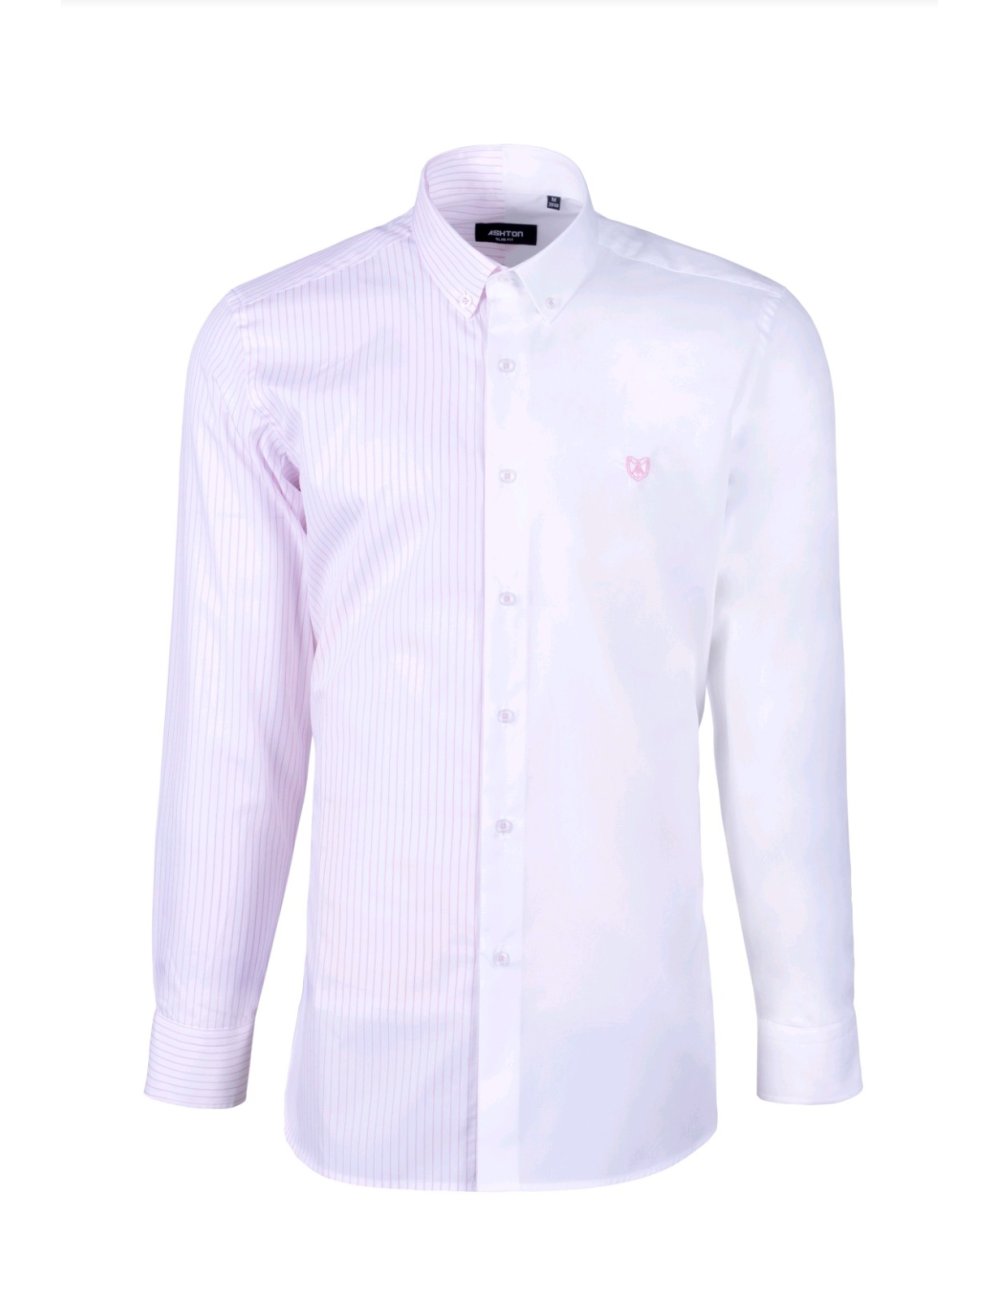 Chemise blanche/rose face